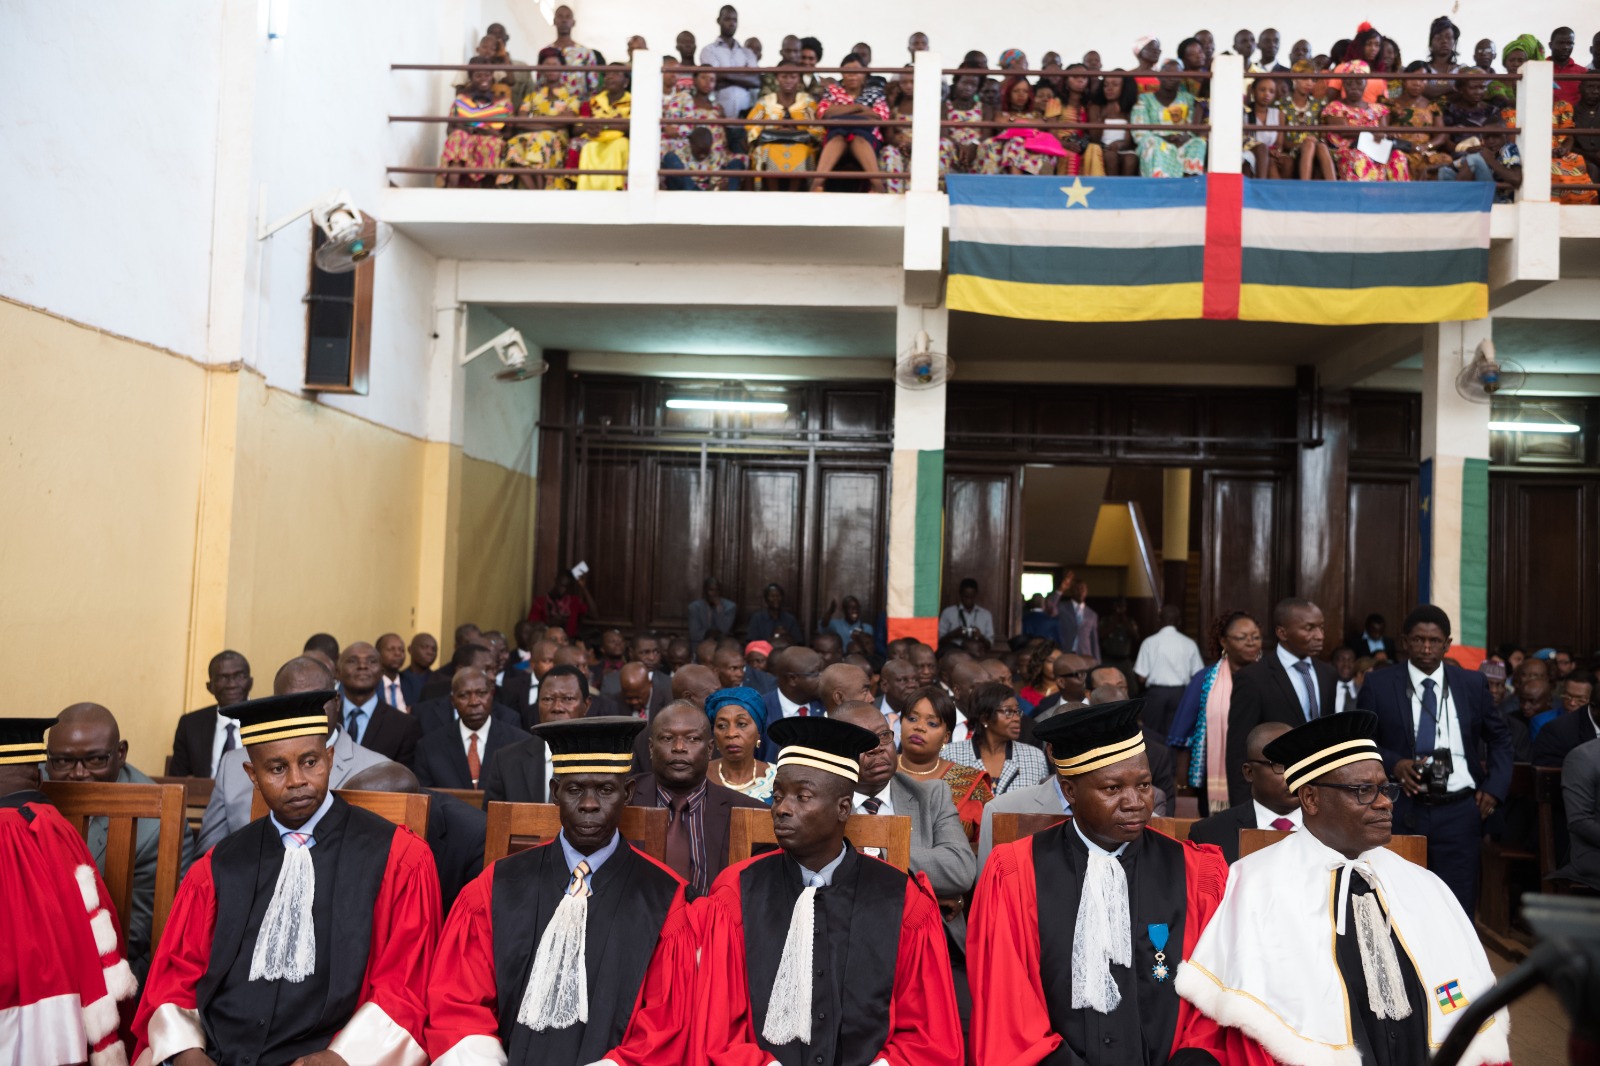 Inaugural session of the Special Criminal Court in the Central African Republic